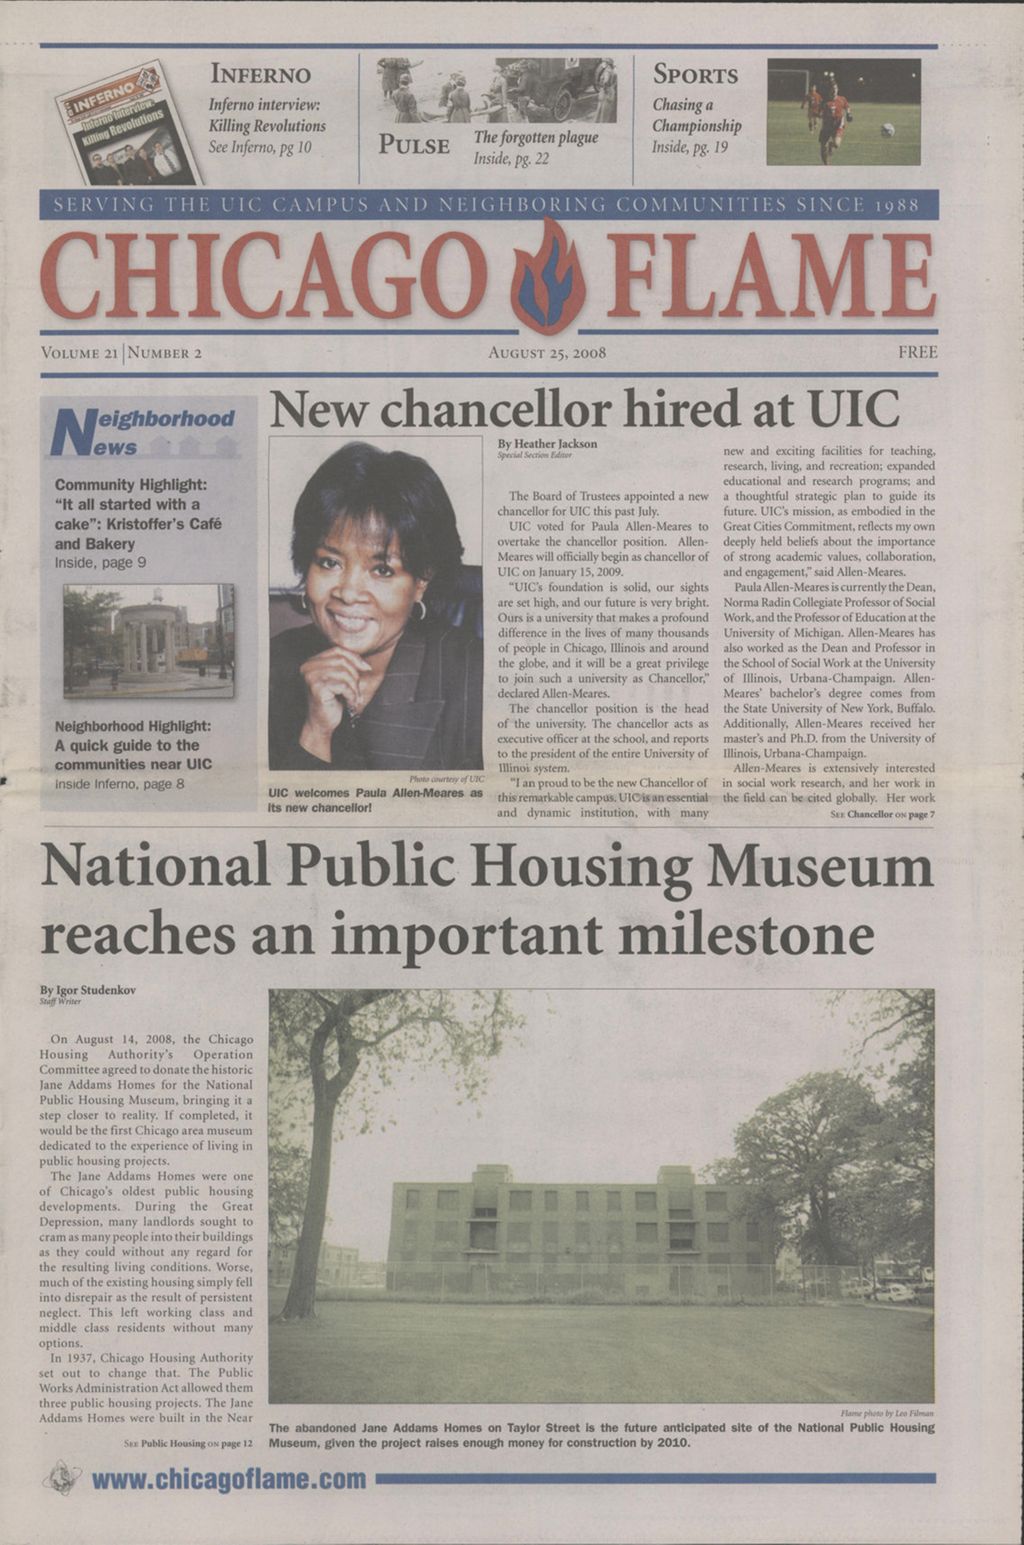 Miniature of Chicago Flame (August 25, 2008)